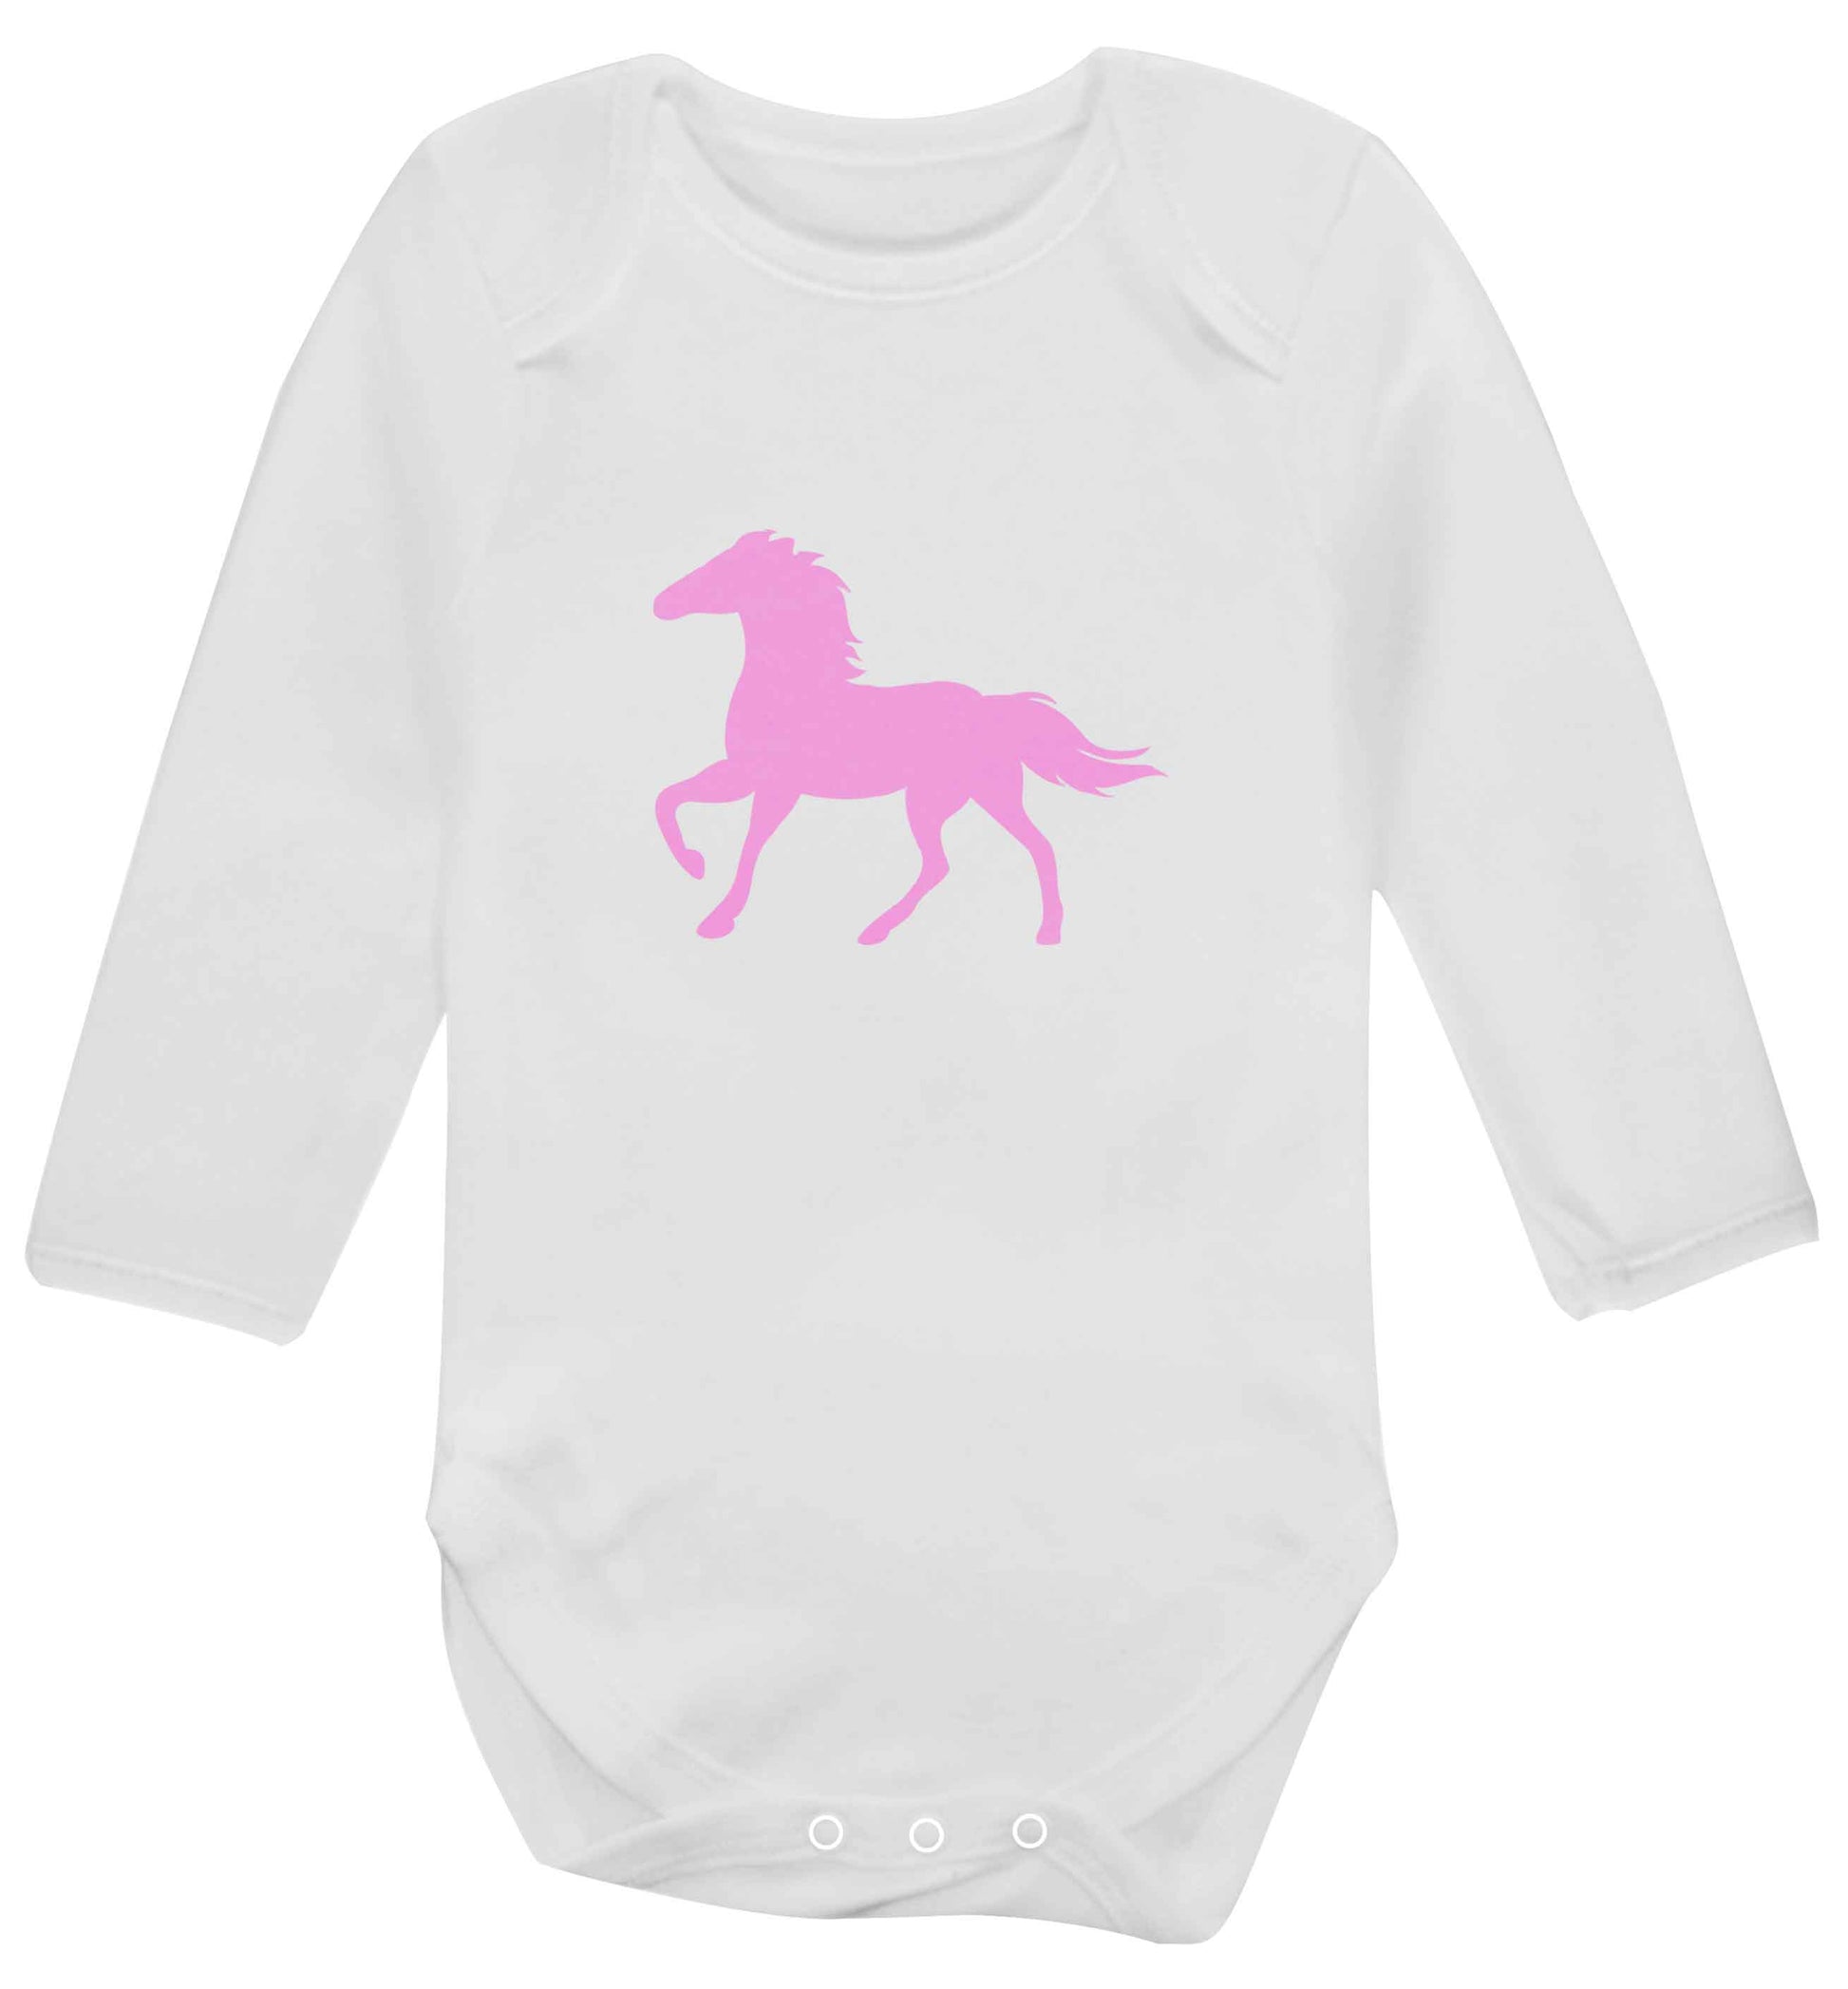 Pink horse baby vest long sleeved white 6-12 months